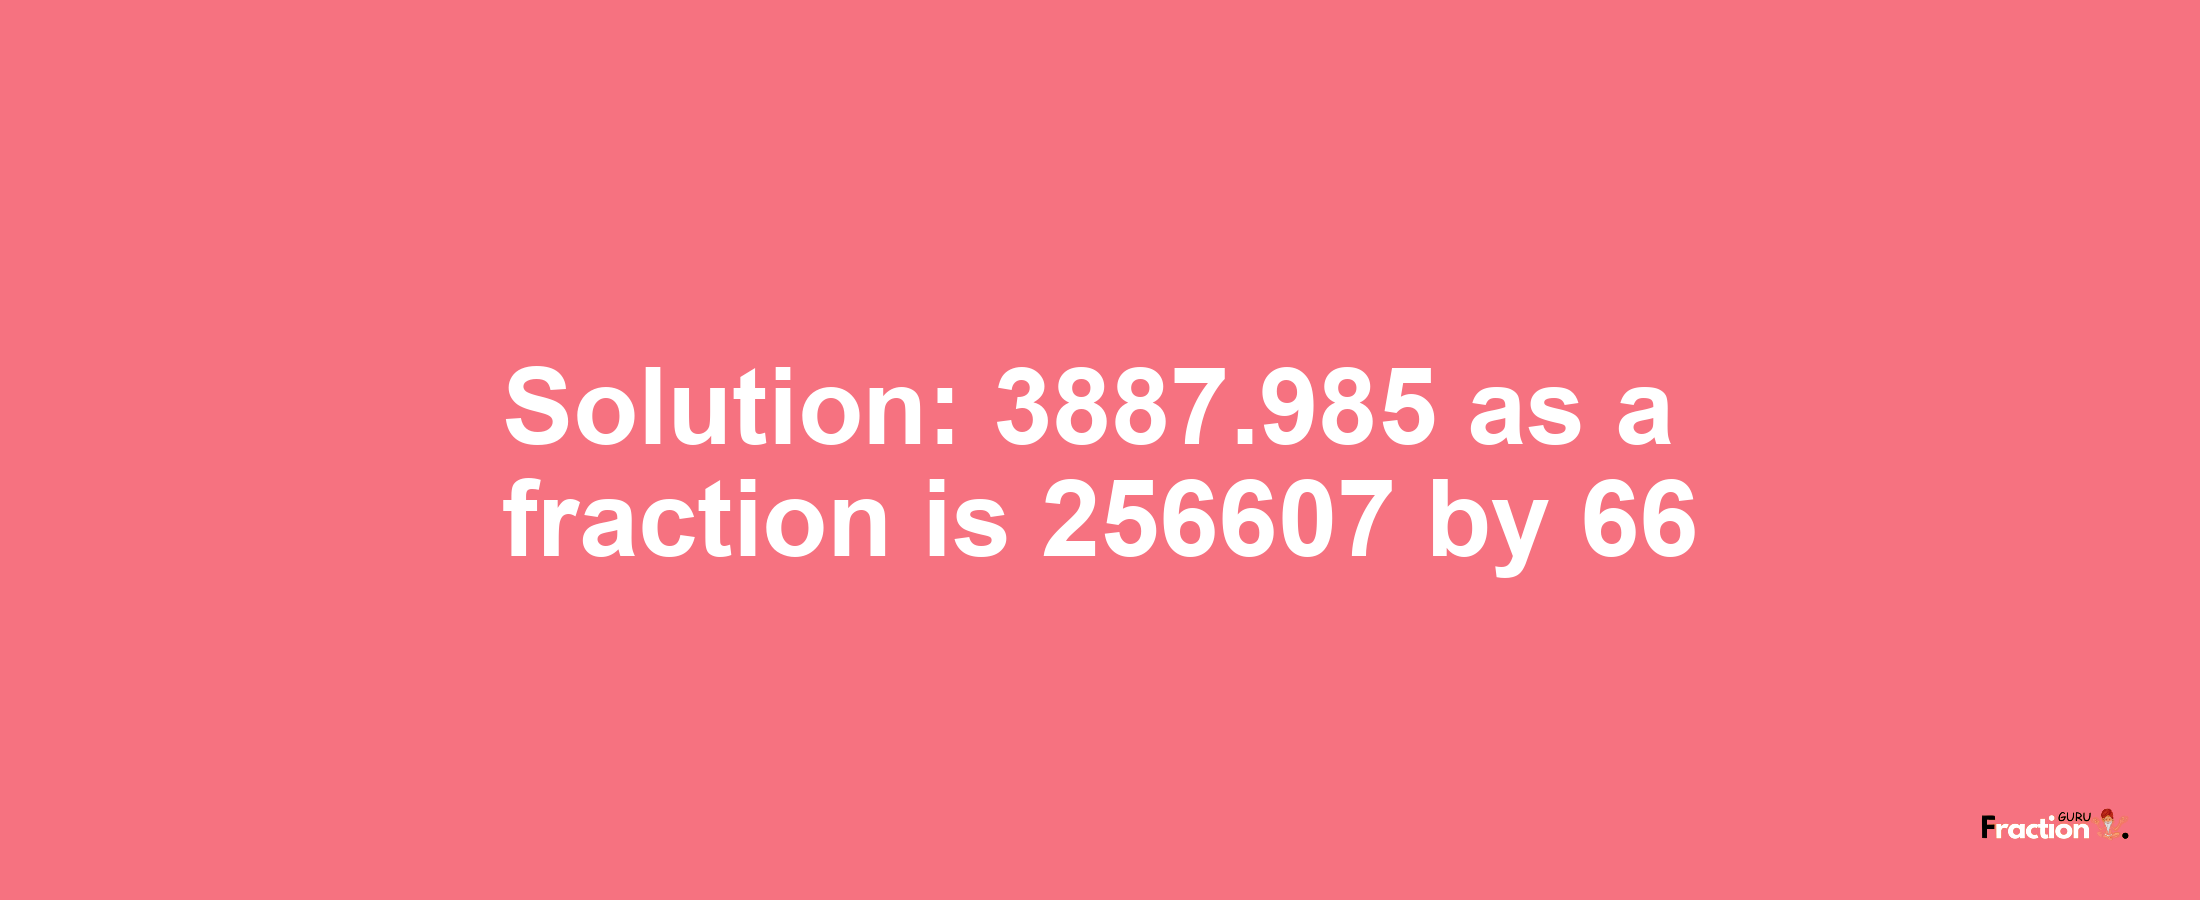 Solution:3887.985 as a fraction is 256607/66